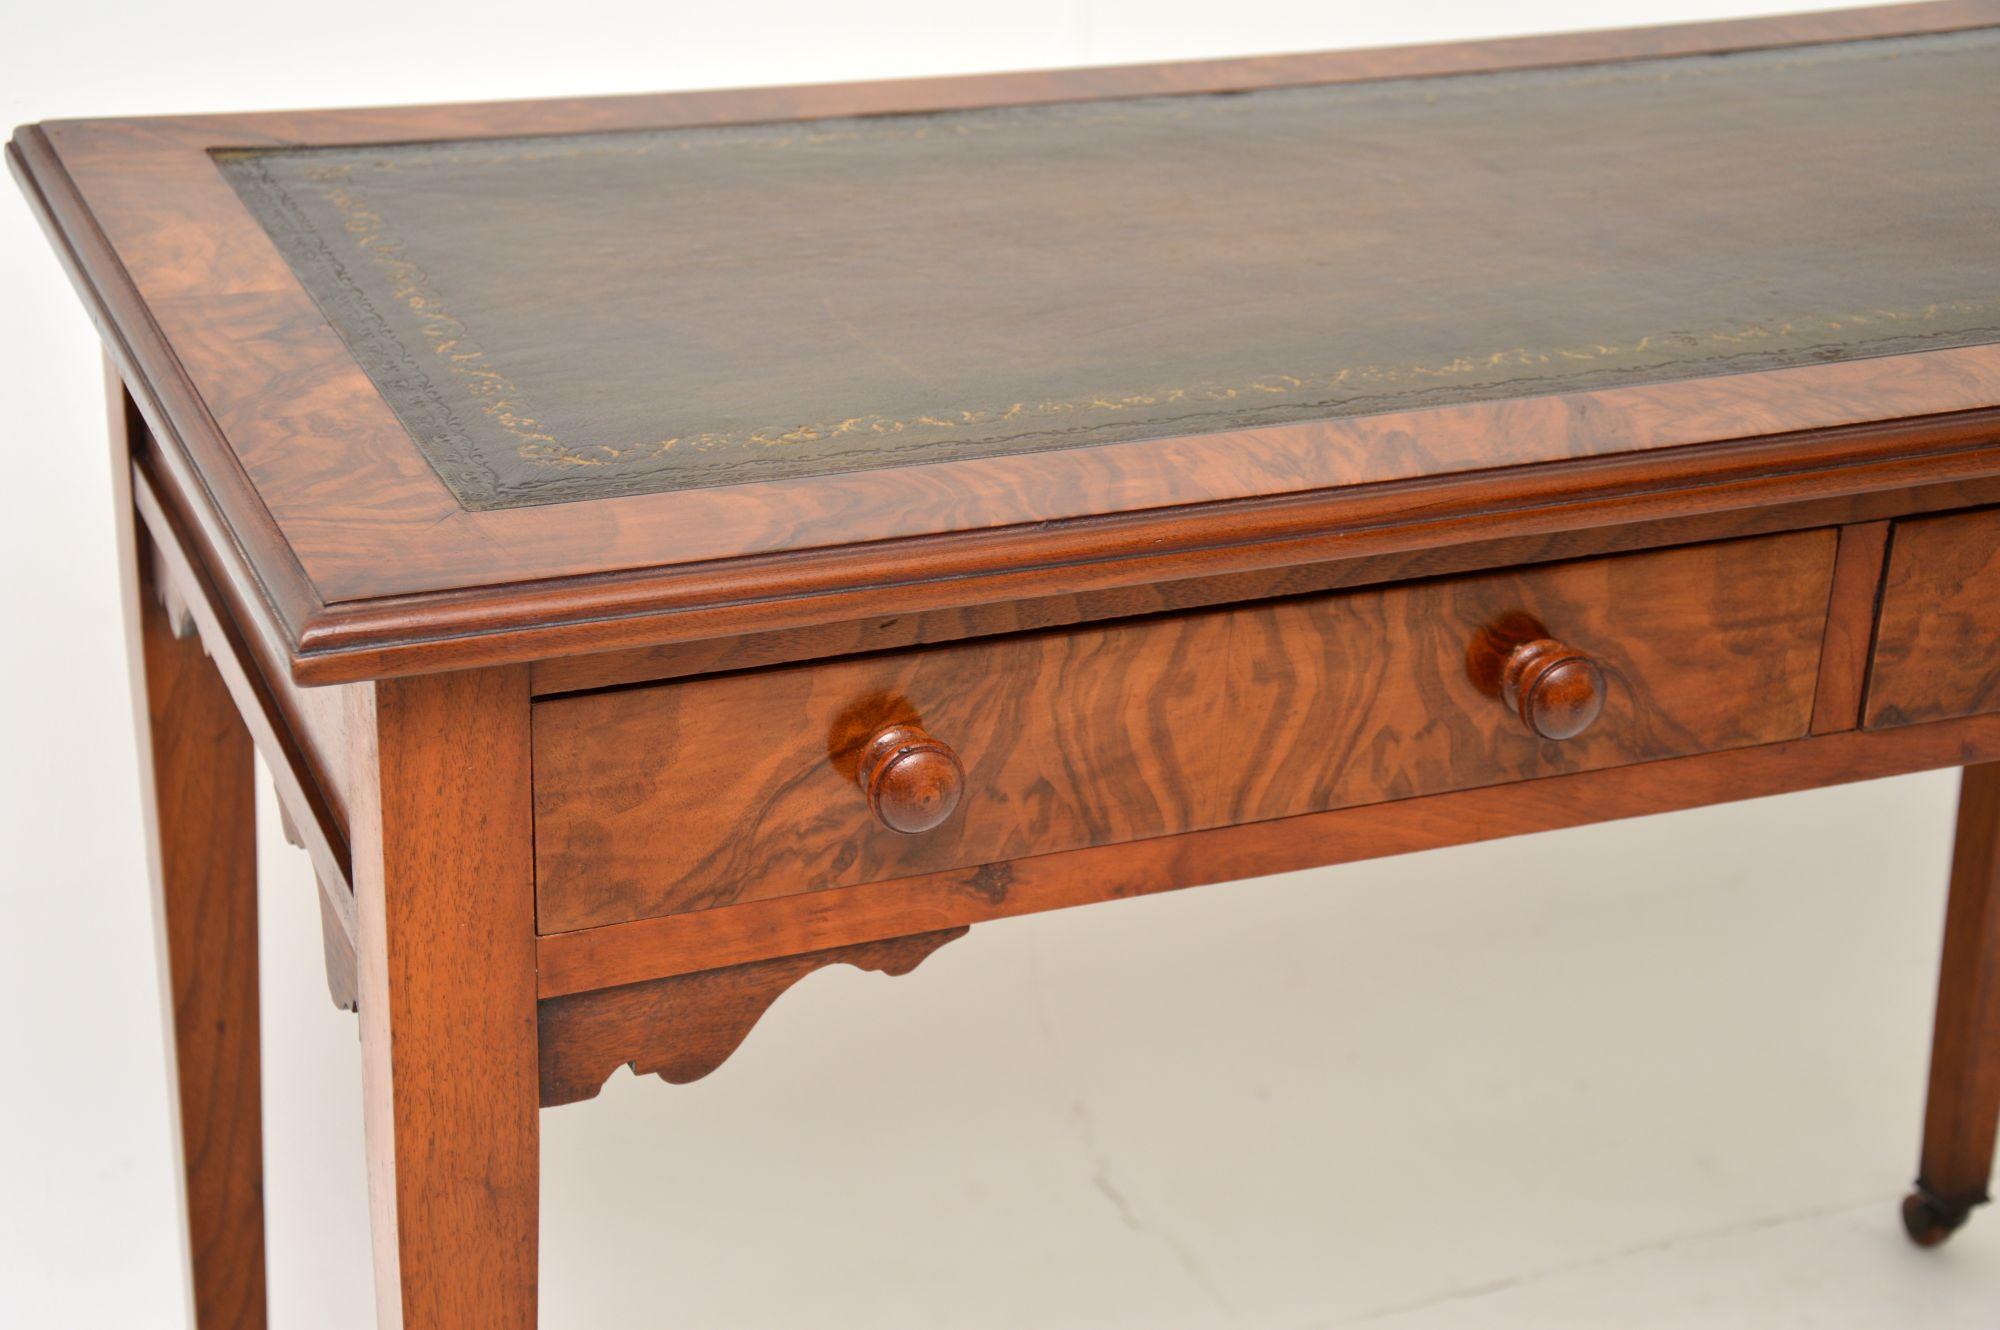 English Antique Victorian Burr Walnut Leather Top Writing Table / Desk